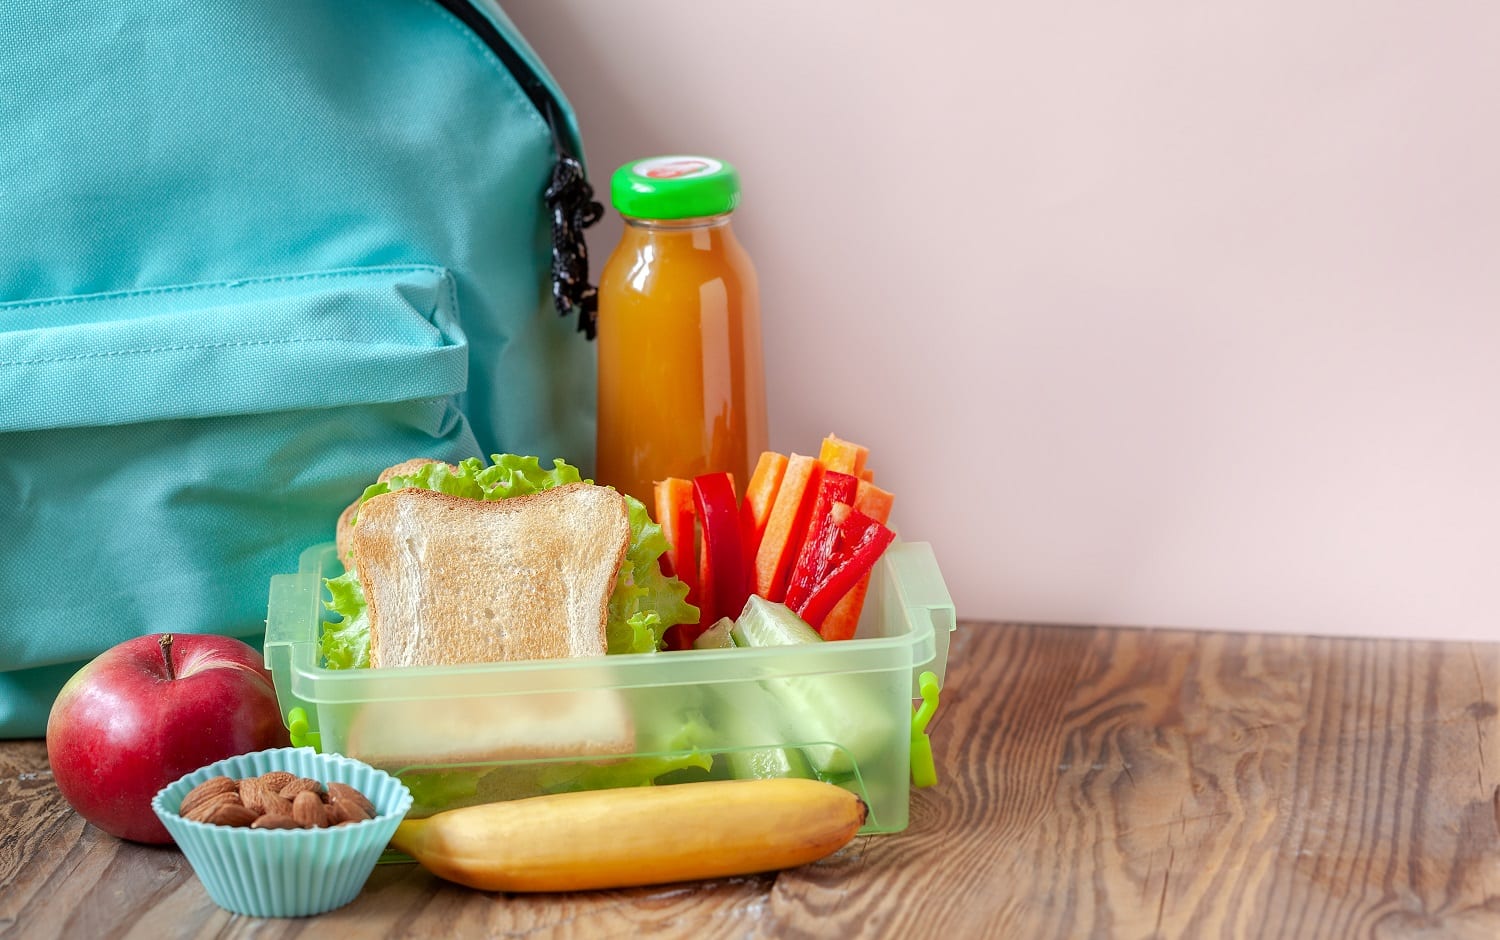 Lunch box with appetizing food and apple, juce, backpack on wooden table